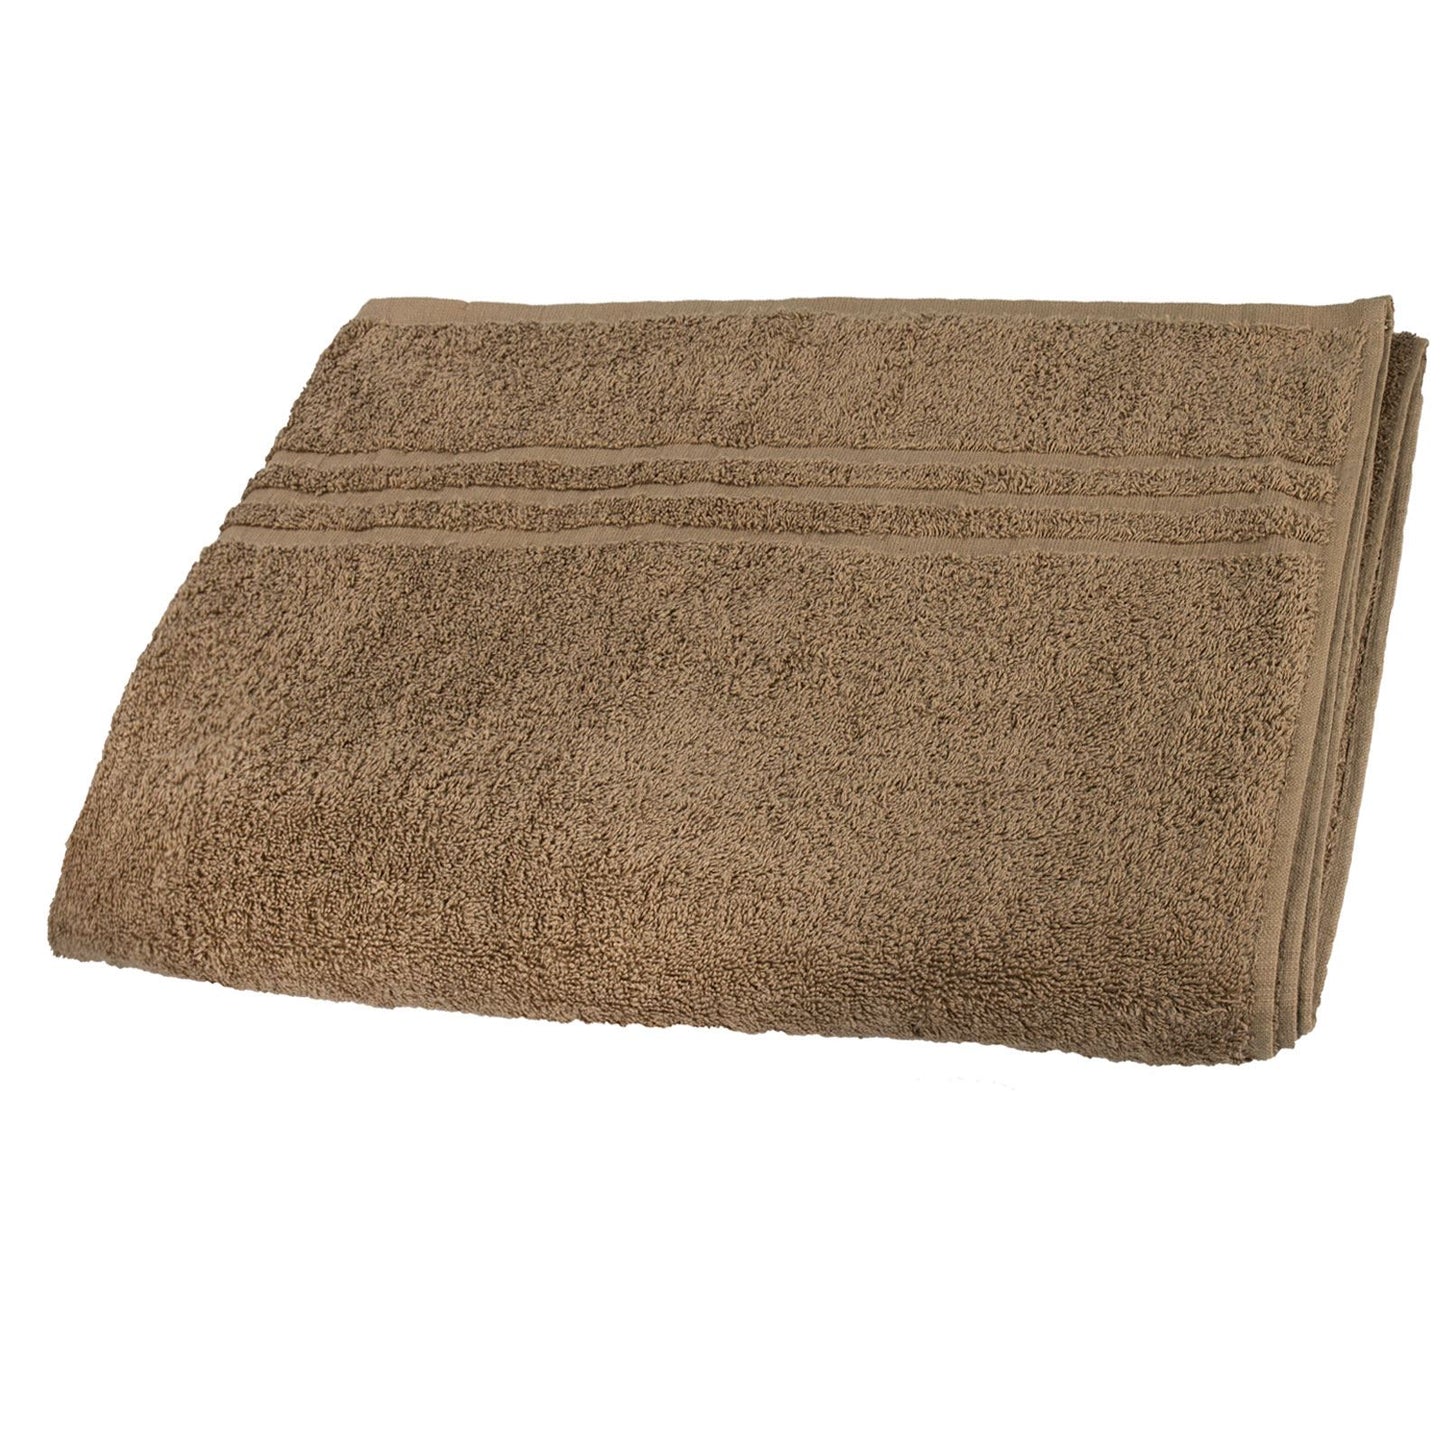 Wrap Yourself in Luxury: 100% Cotton Large Bath Towel